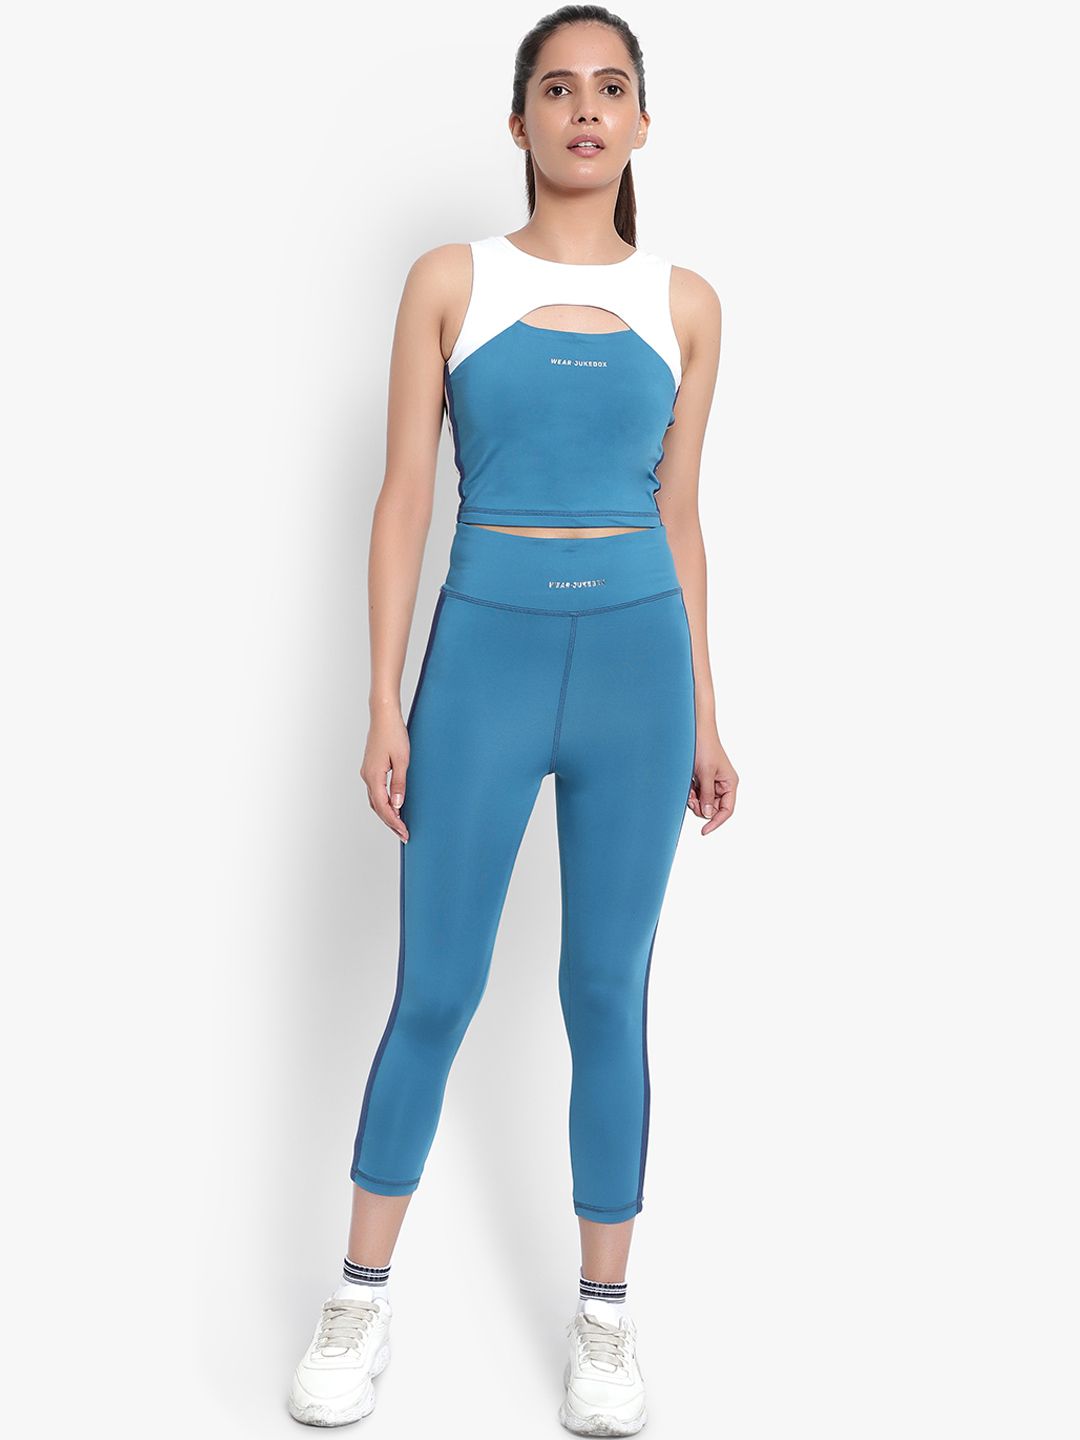 Wearjukebox Women Blue & White Colourblocked Sports Crop Top with Tights Price in India